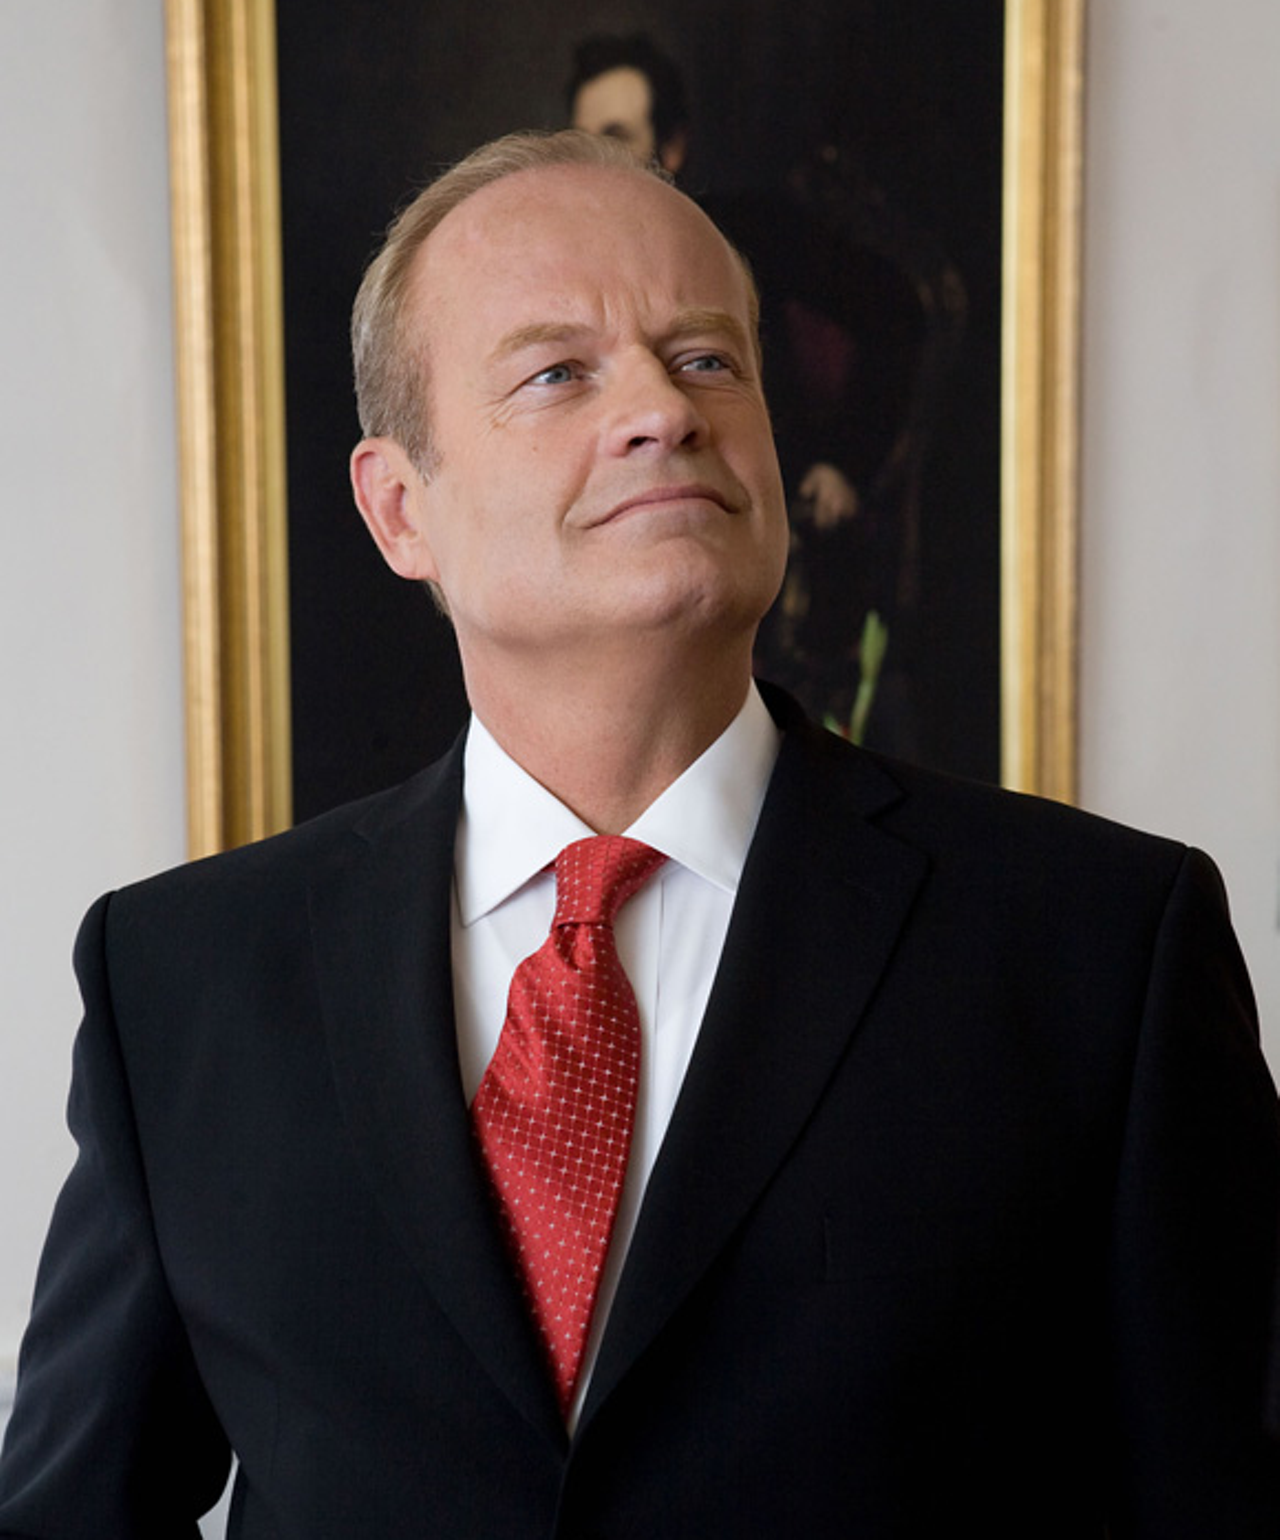 Kelsey Grammer as President Andrew Boone in Swing Vote (2008)
Before Joe the Plumber (remember him?) came into the spotlight in October 2008, Swing Vote's Bud (Kevin Costner), determined the outcome of a presidential election. Bud's a good ol' boy who knows nothing about politics and Grammer's the president. But Bud's vote is the deciding one, so he gets to play football with the secret service, of course. Grammer has the proverbial beer with Bud and the credits roll before we know which way Bud was swinging.